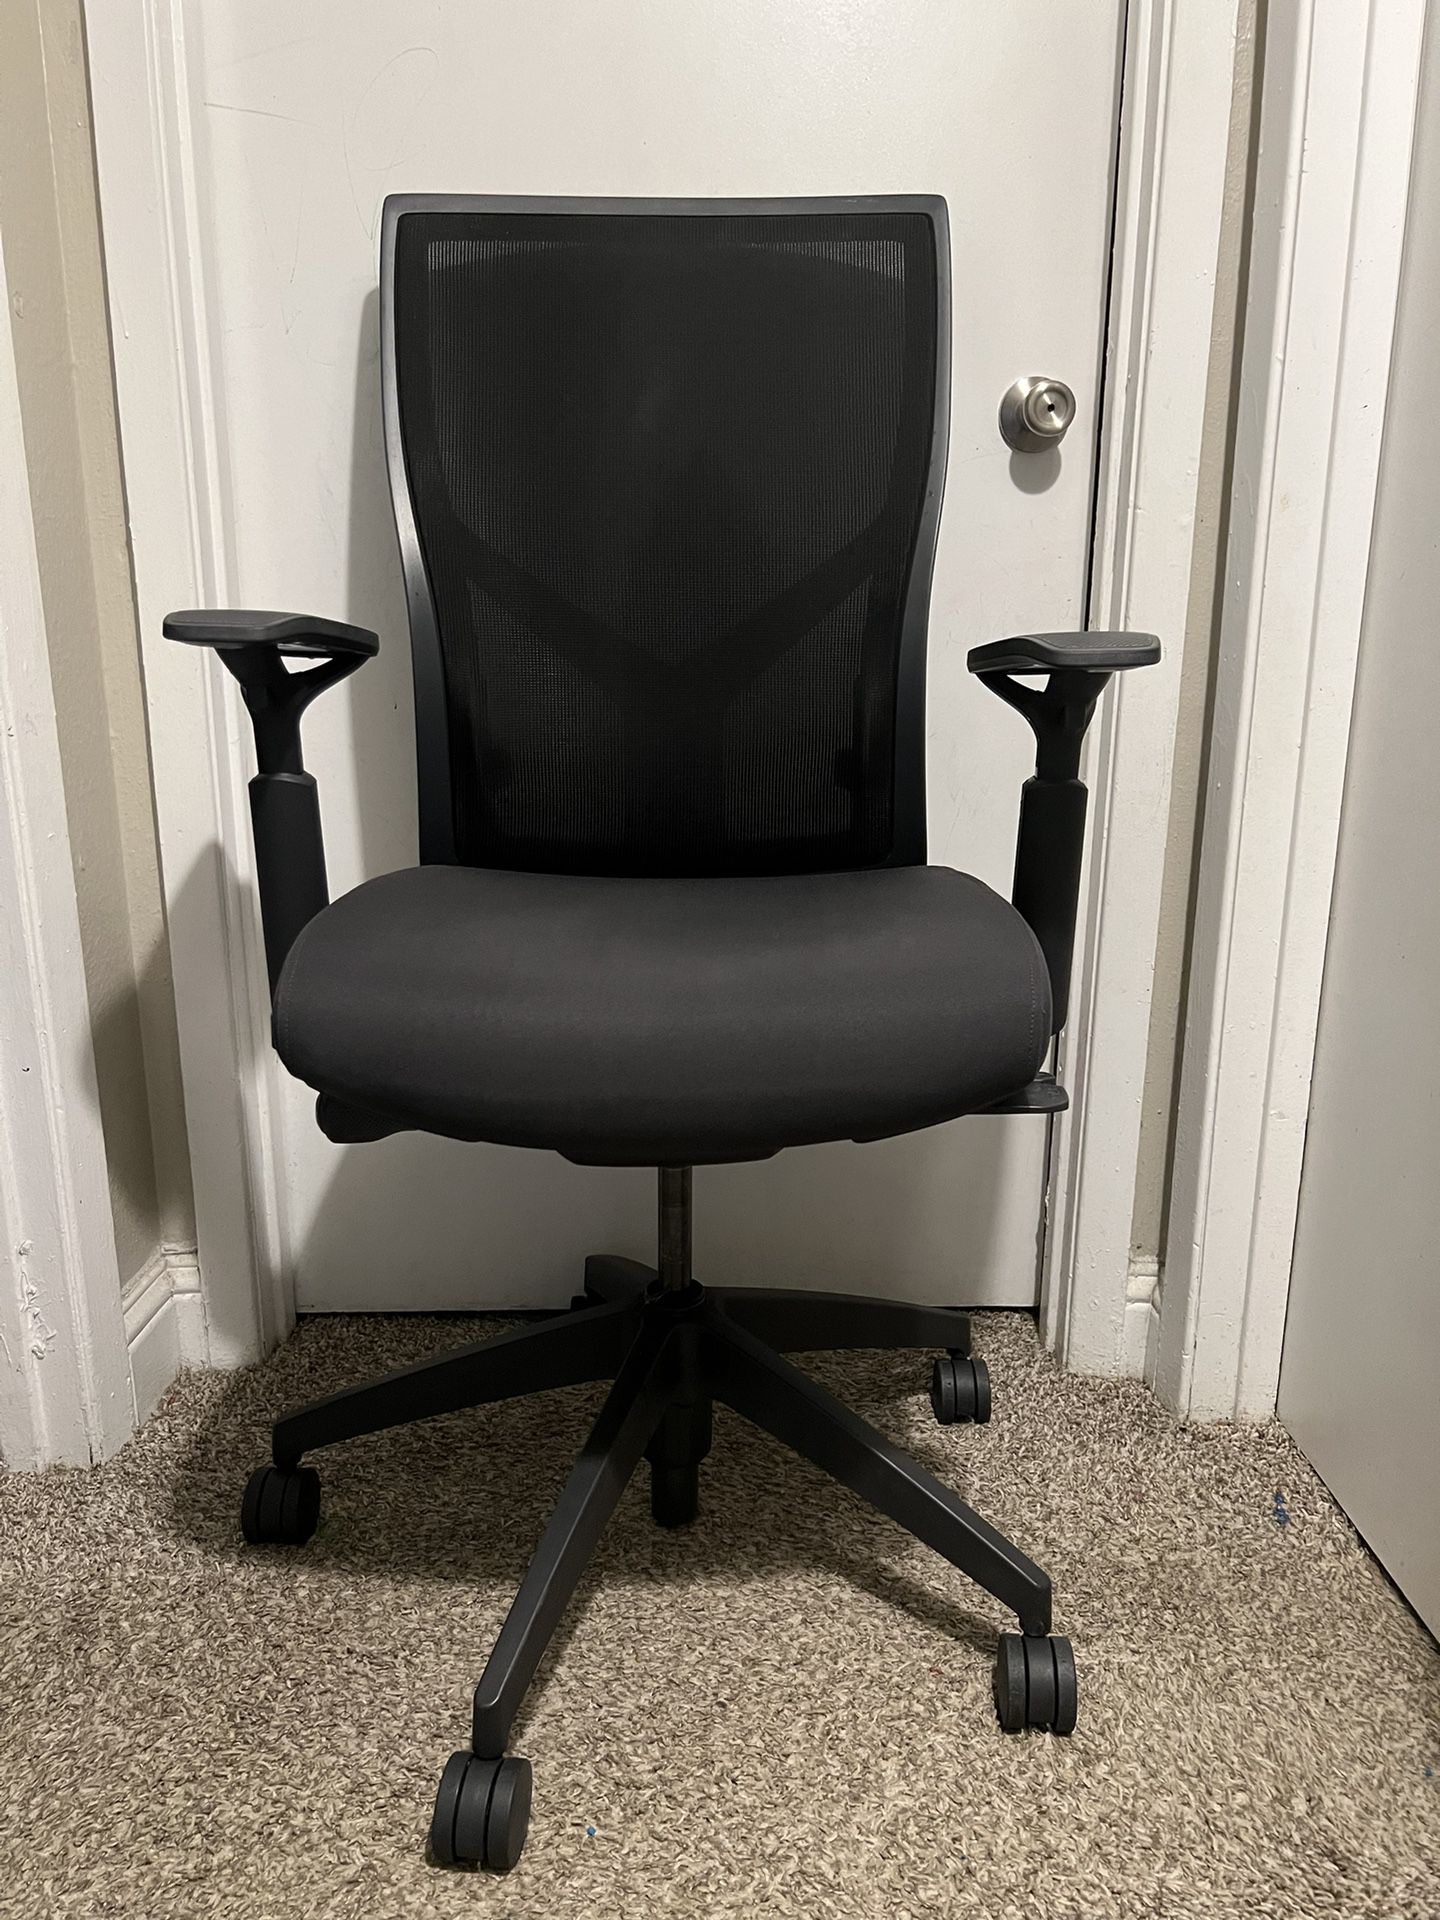 SitOnit Torsa Office chair 